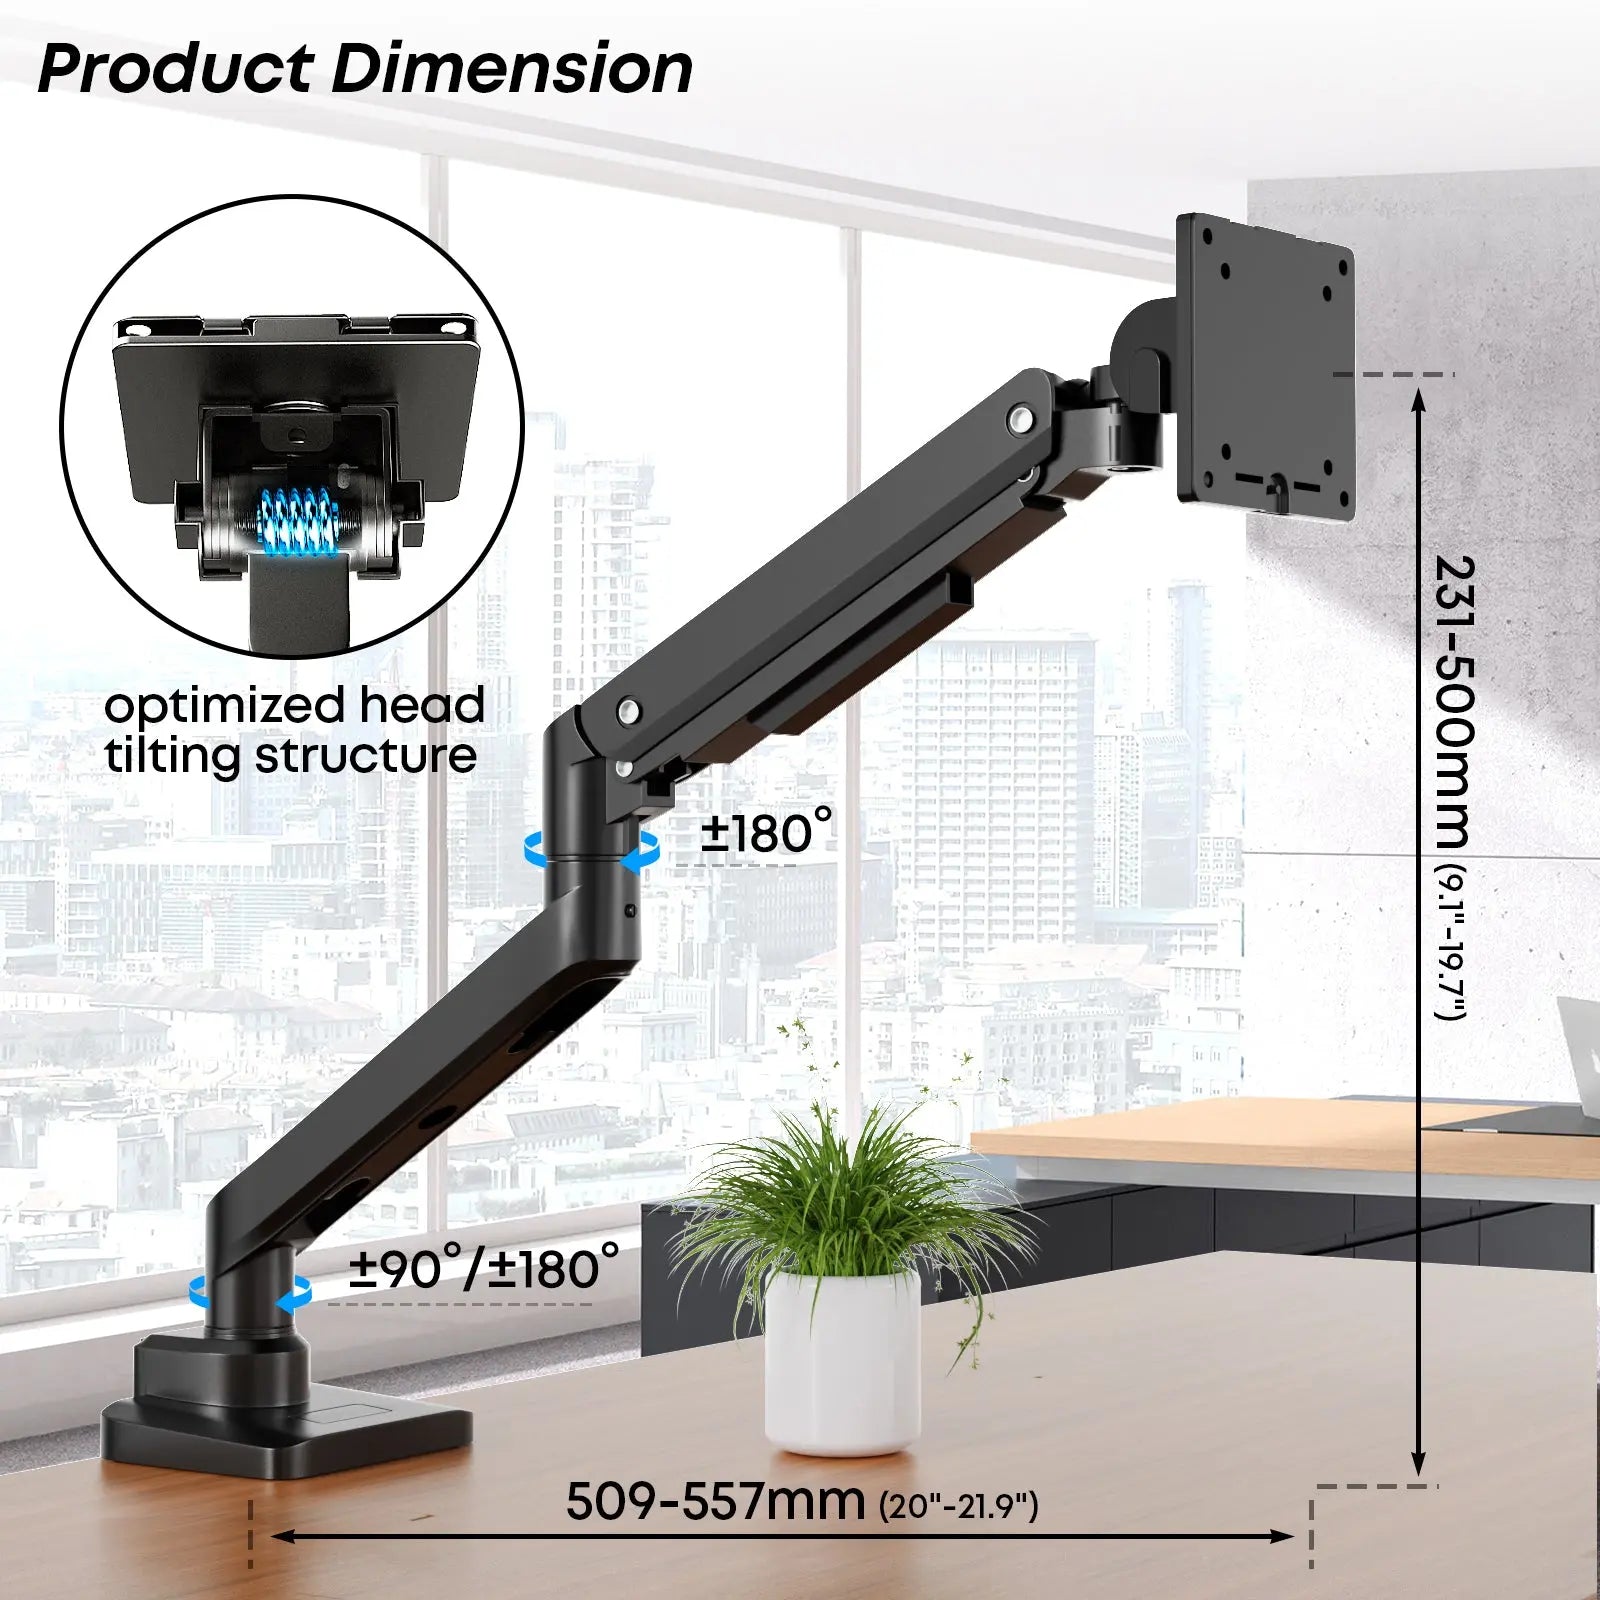 PUTORSEN Premium Heavy Duty Monitor Arm for 17 to 49 inch Screens up to 44lbs, Fully Adjustable Ultrawide Single Clamp-on Desk Mount Stand PUTORSEN